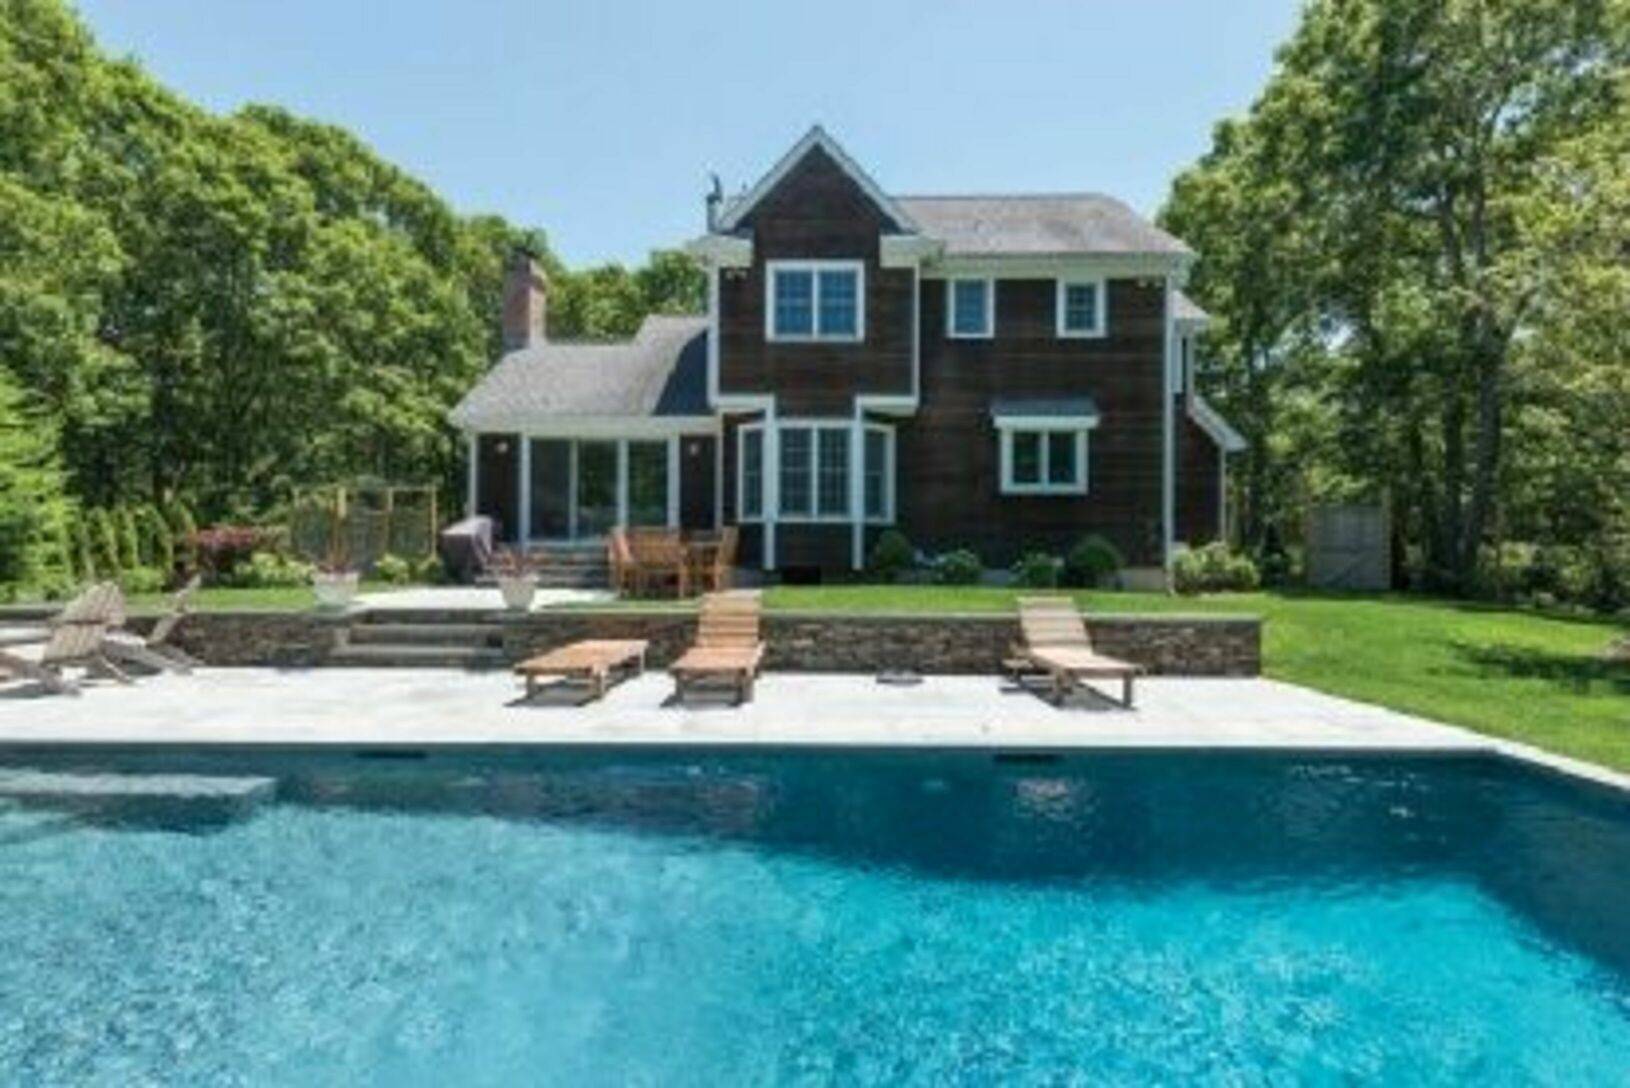 4 Bedroom Home located in private area of East Hampton!